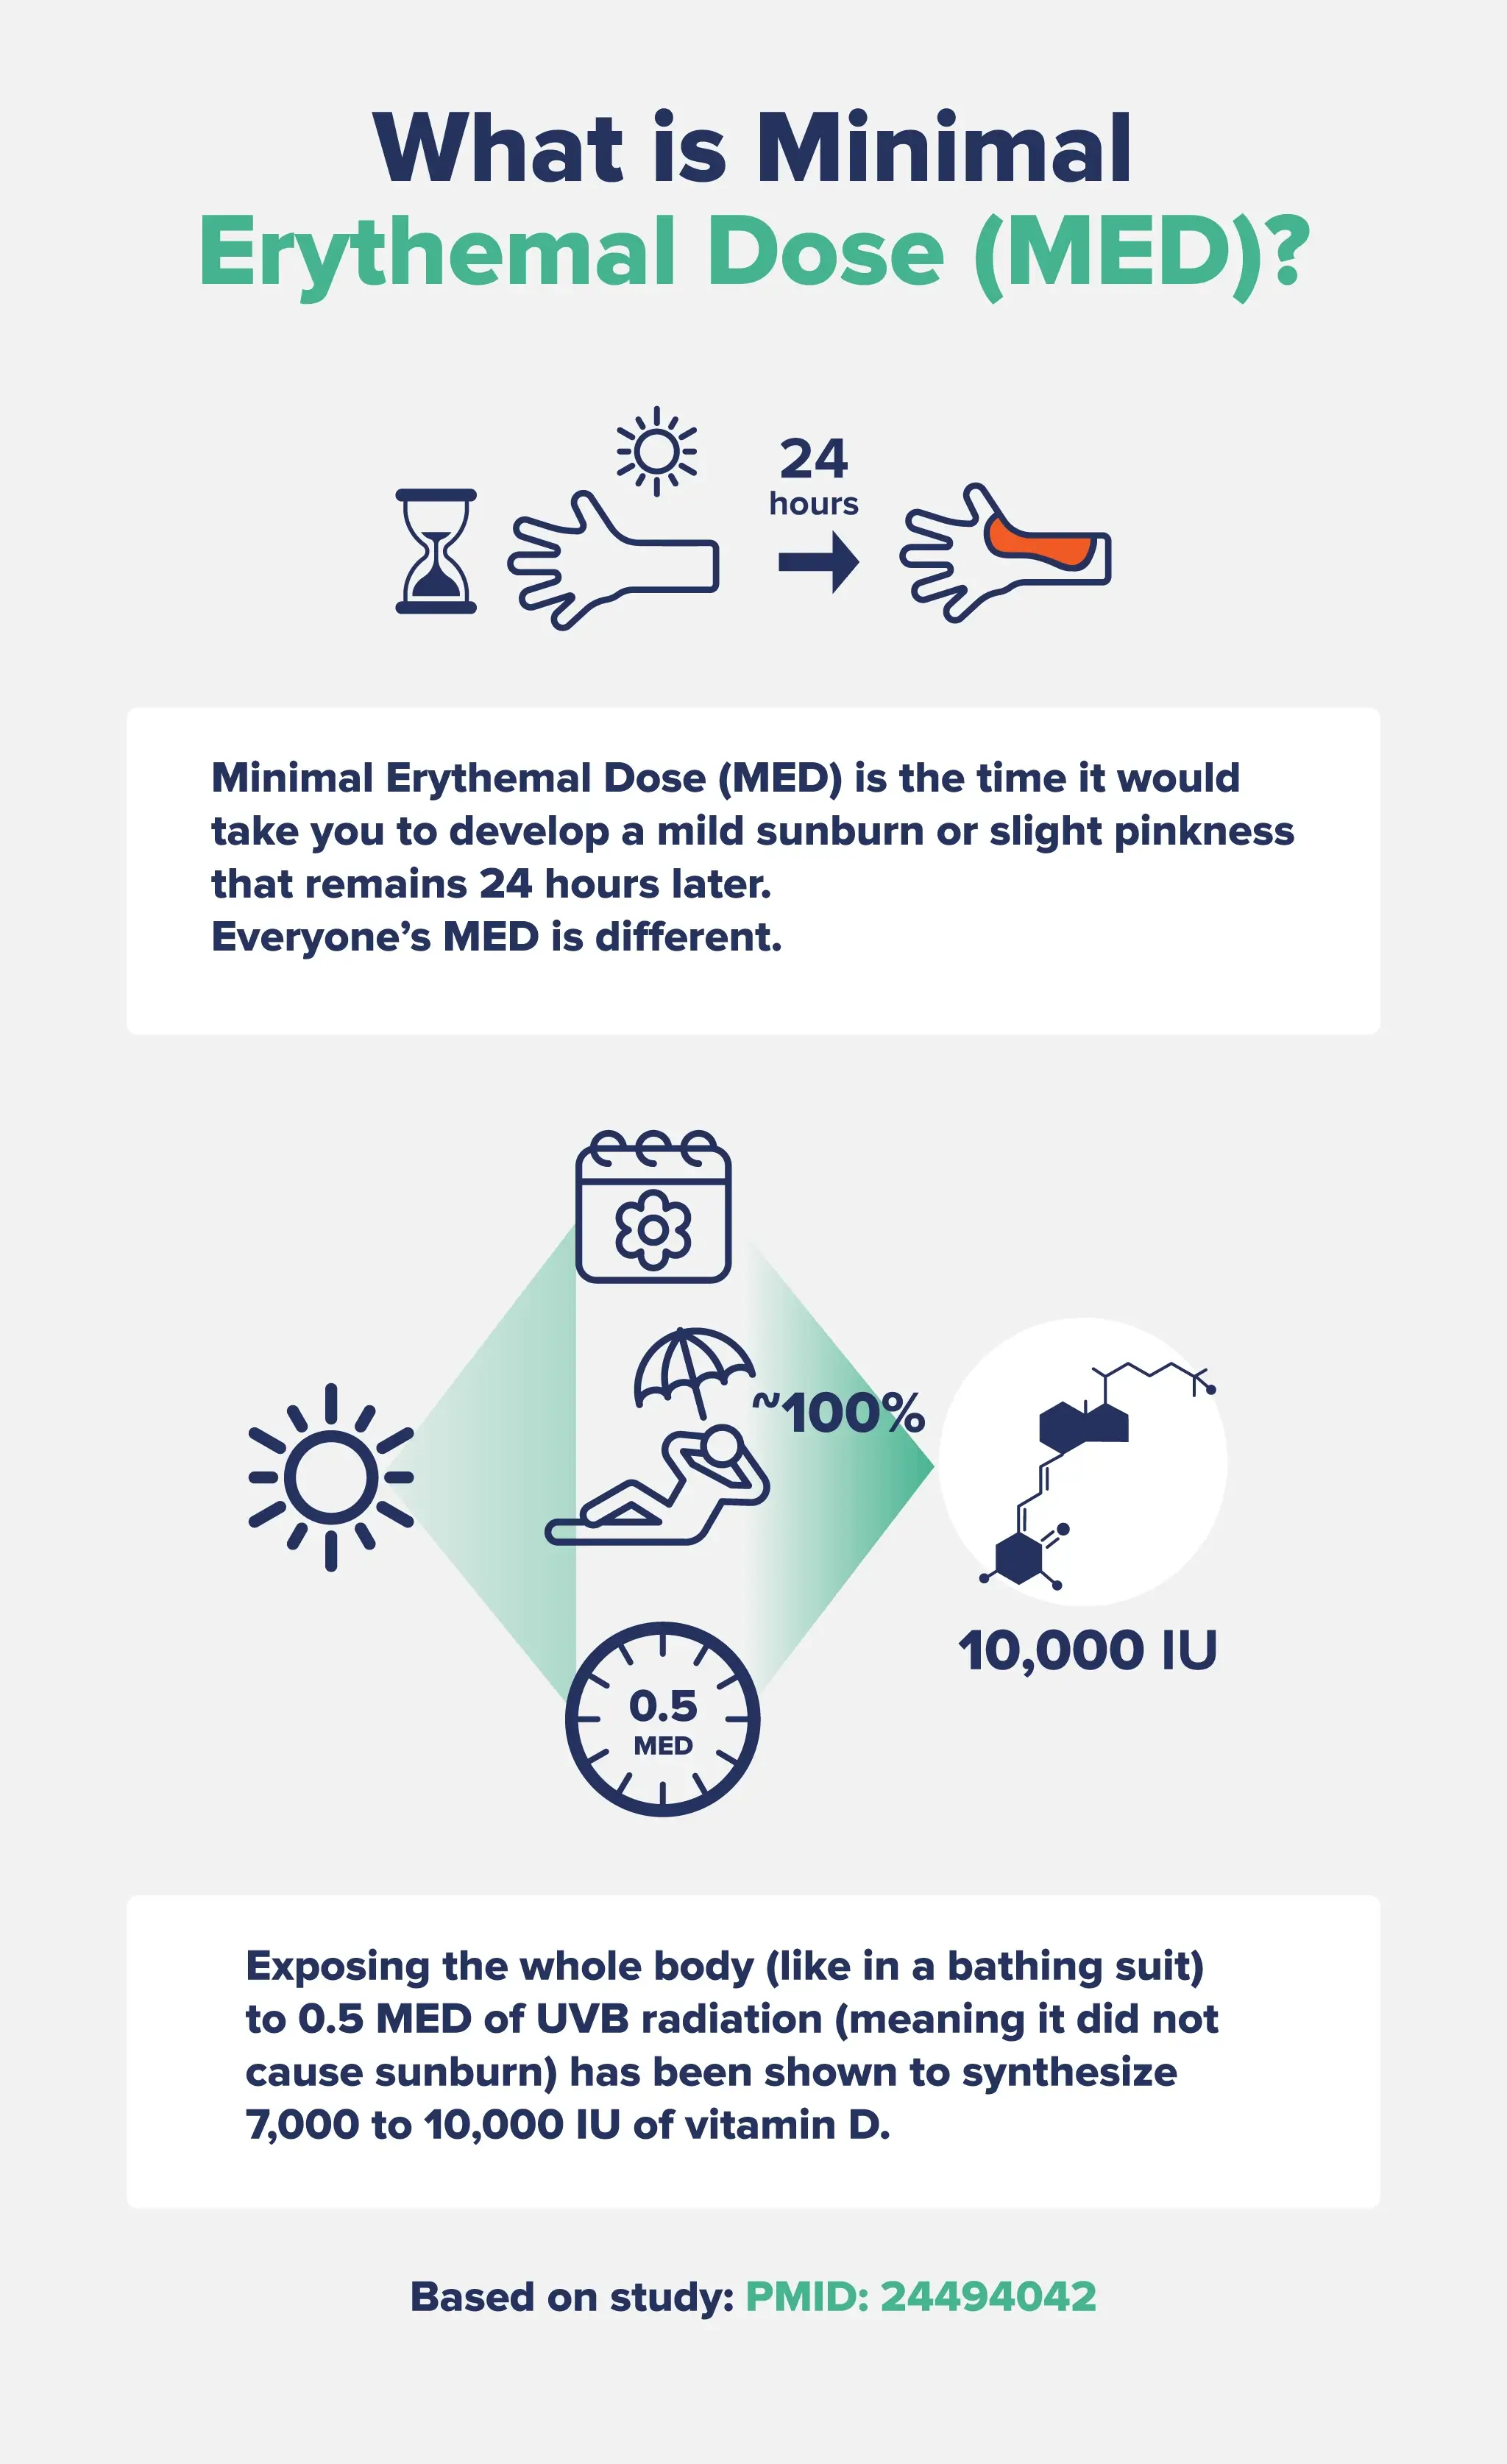 Infographic describing and defining what miminimal erythemal dose (MED) is?